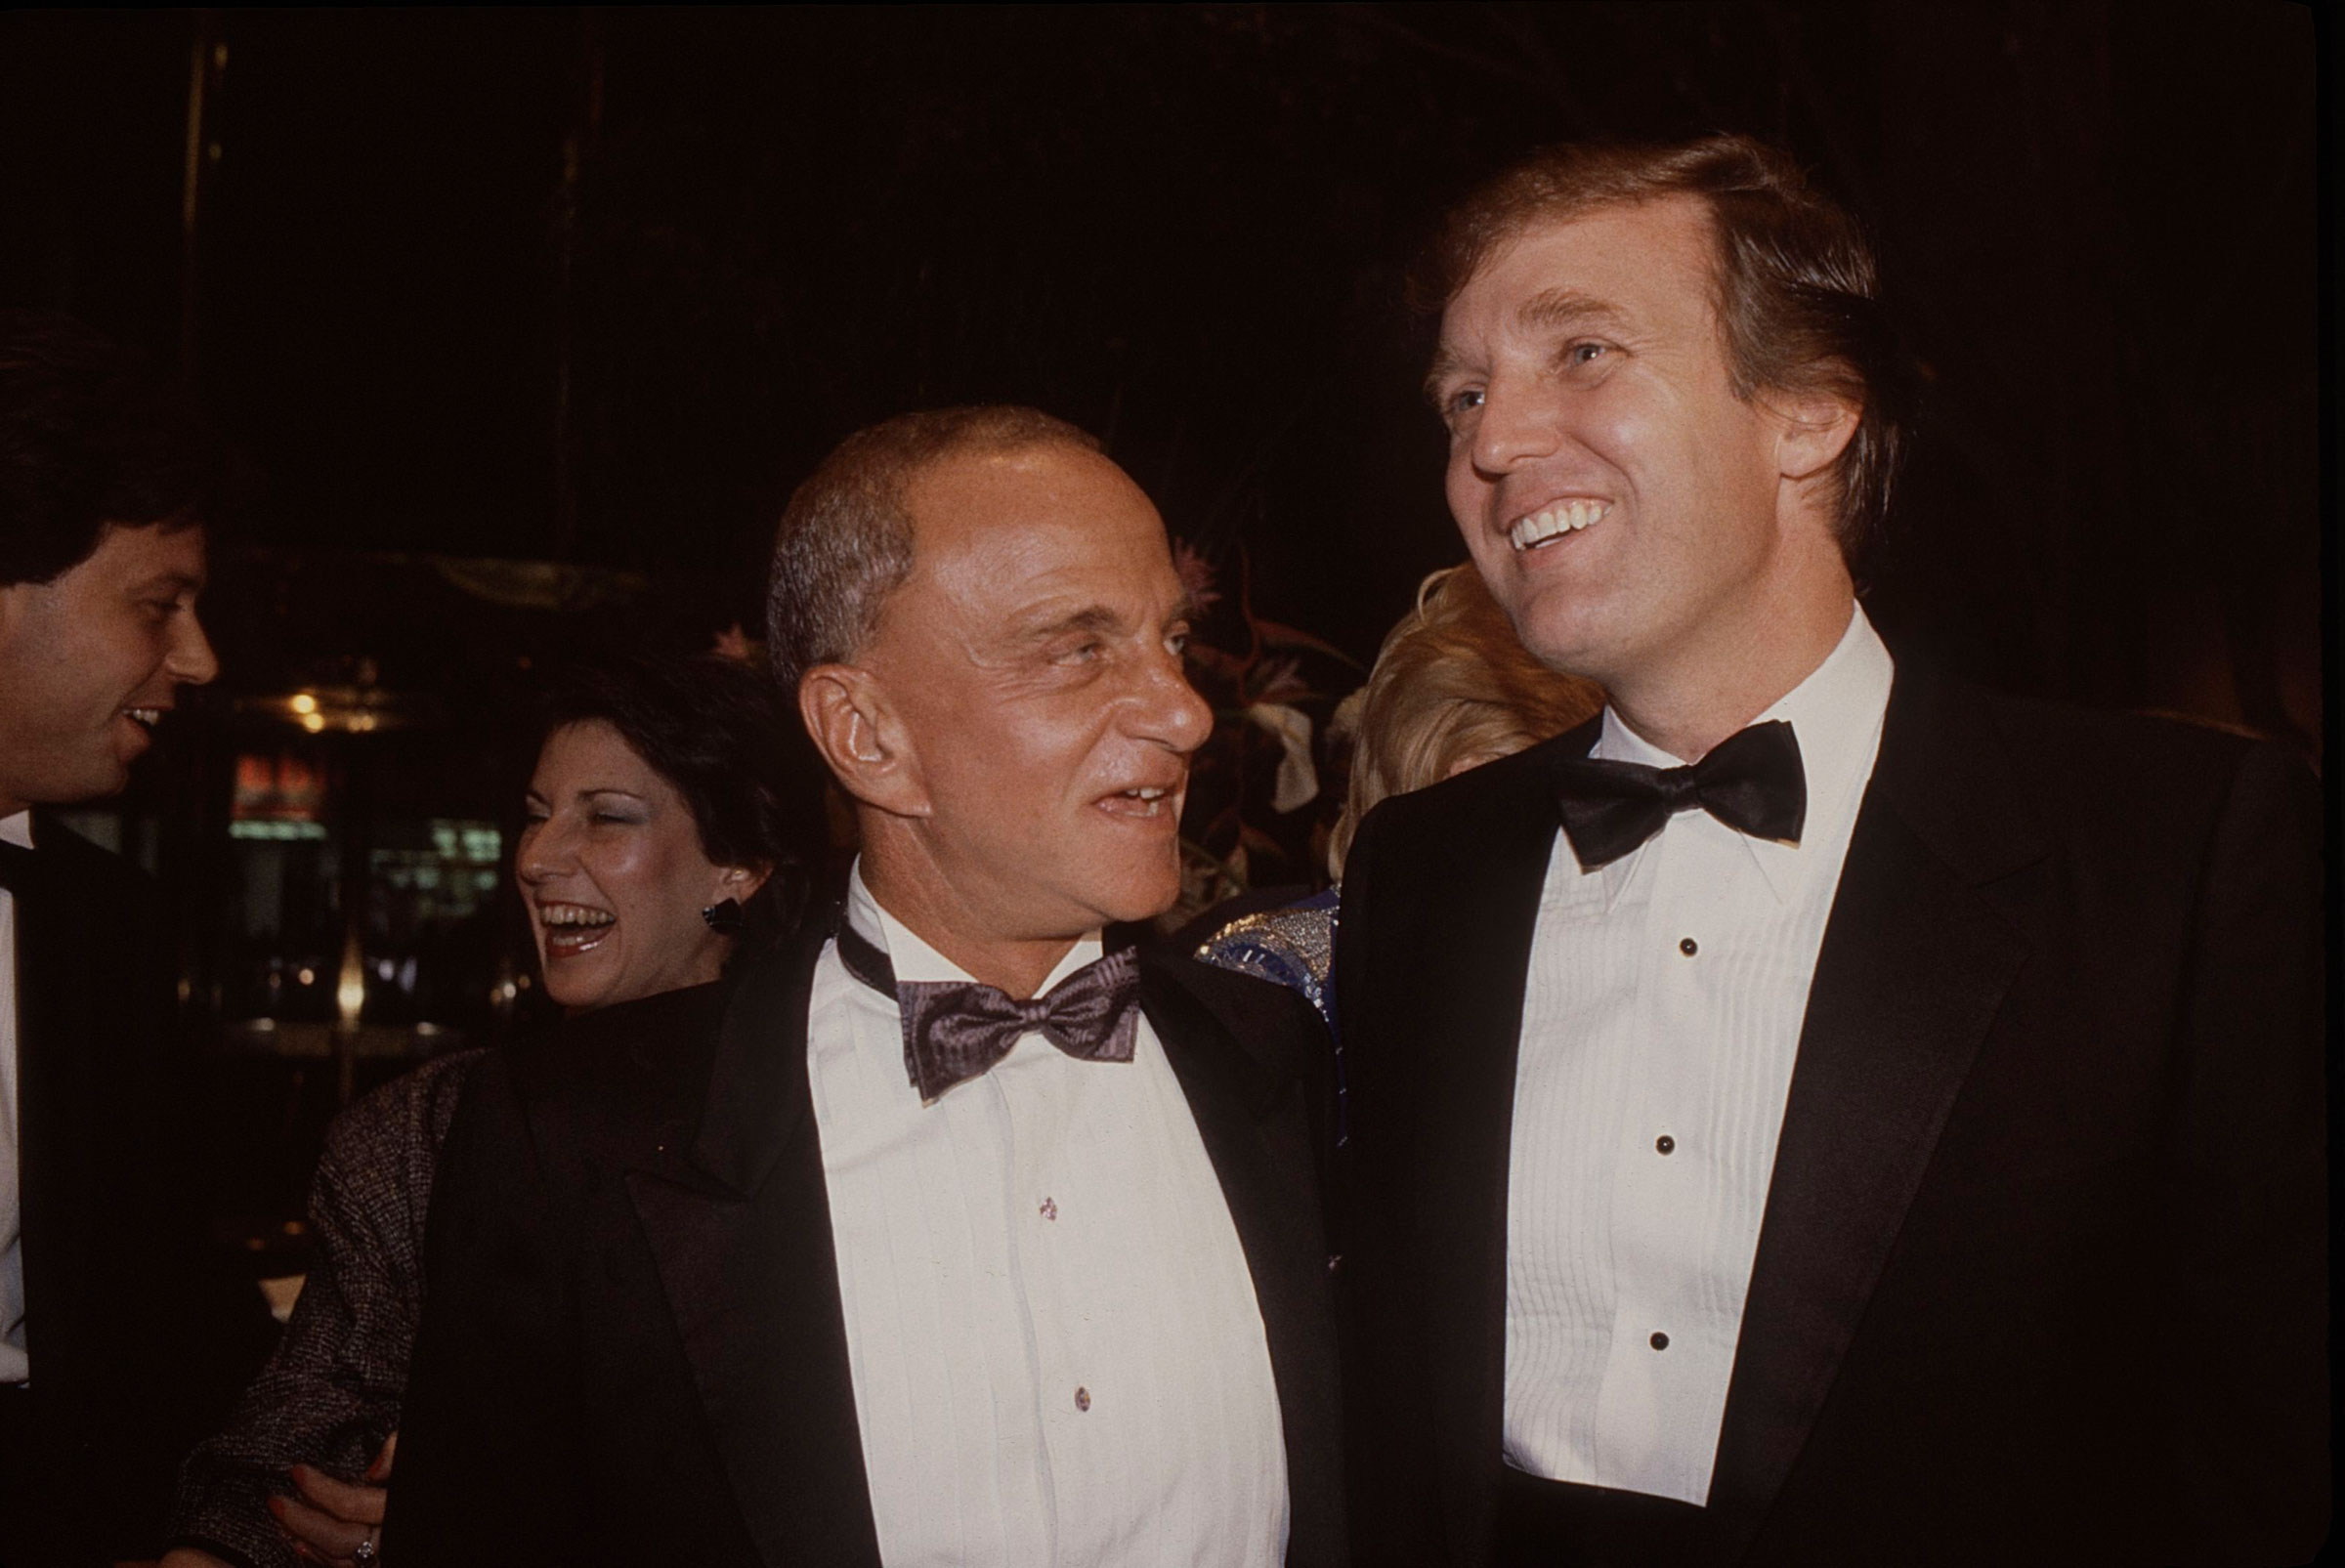 Roy Cohn (L) and Donald Trump attend the Trump Tower opening in October 1983 at The Trump Tower in New York City. (Sonia Moskowitz—Getty Images)